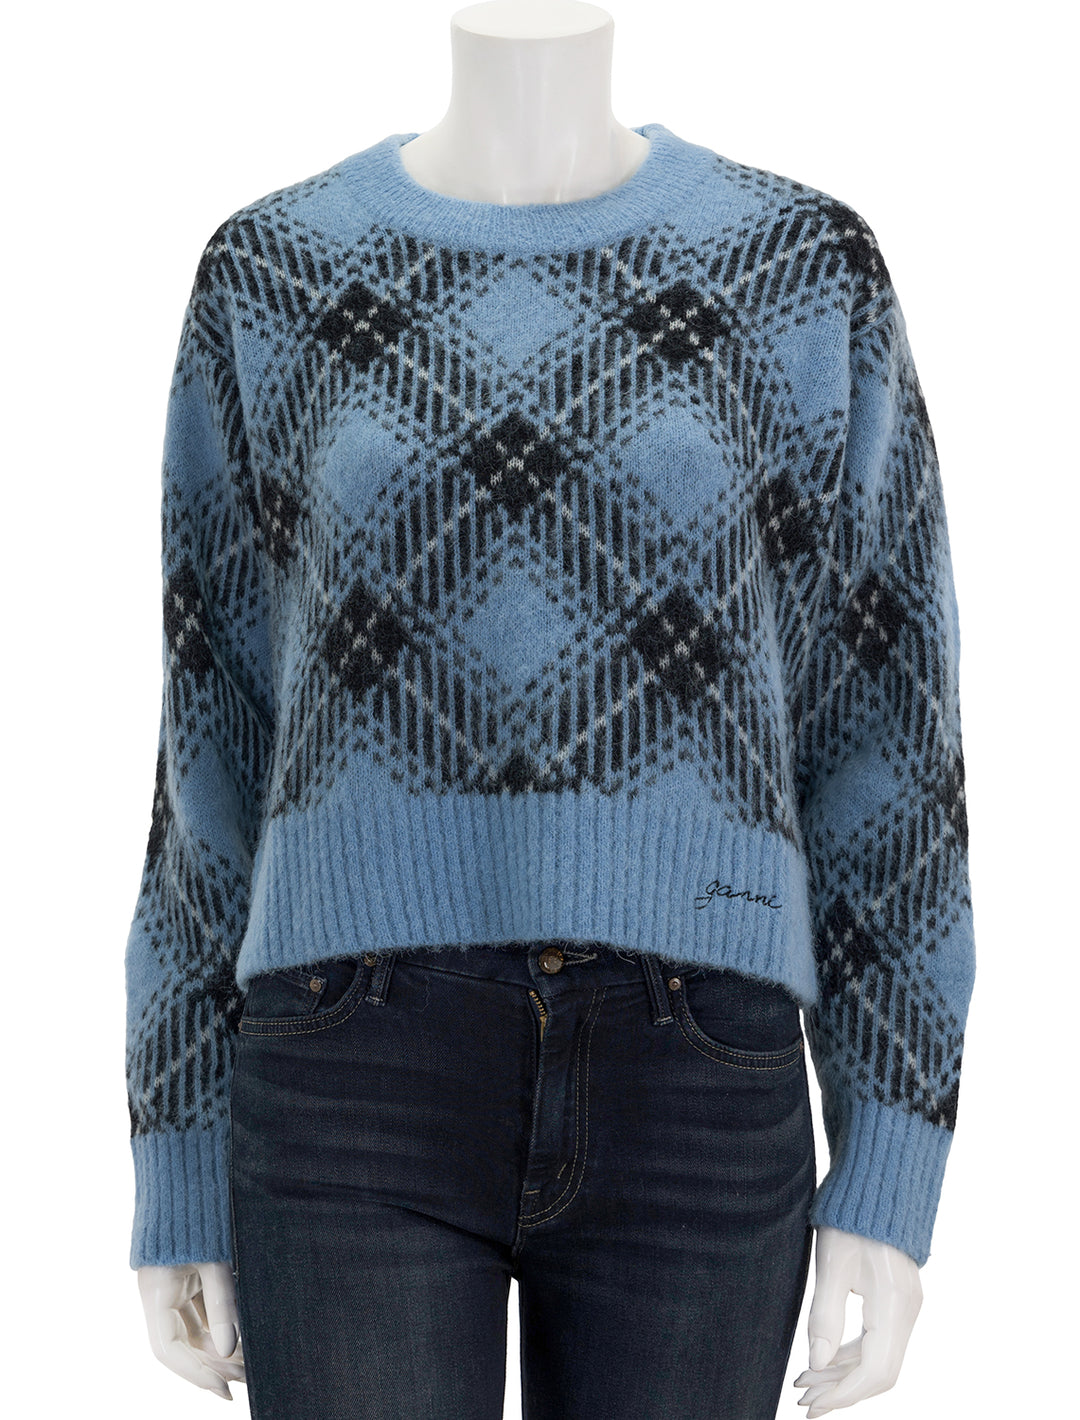 Front view of GANNI's check wool oversized pullover in silver lake blue.